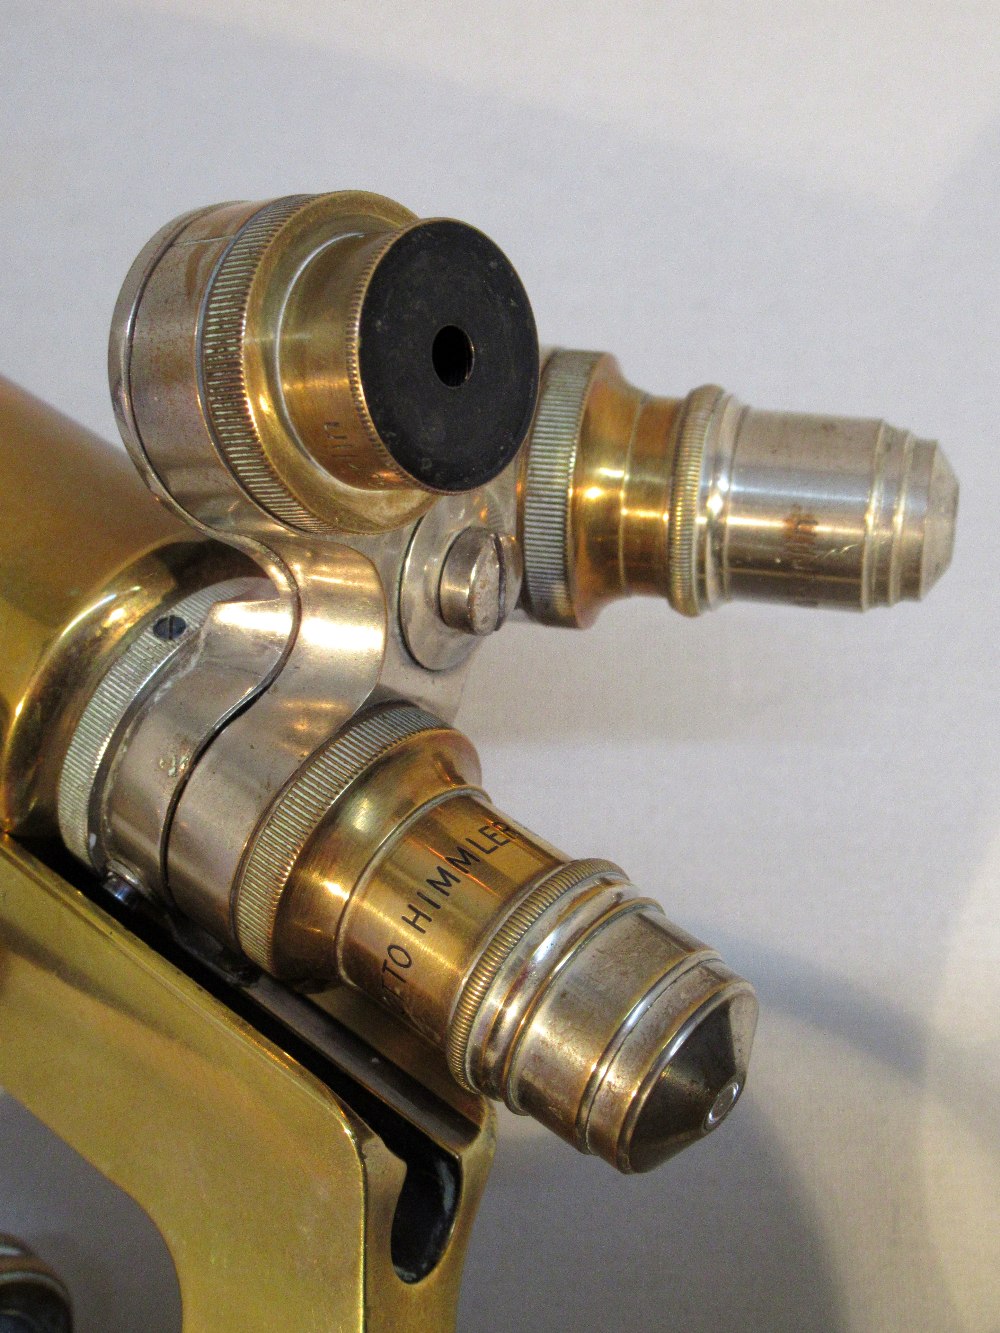 A LATE C19th BRASS MICROSCOPE BY OTTO HIMMLER. BERLIN N.14160 LACQUERED BRASS, HORSE SHOE FOOT, - Image 4 of 10